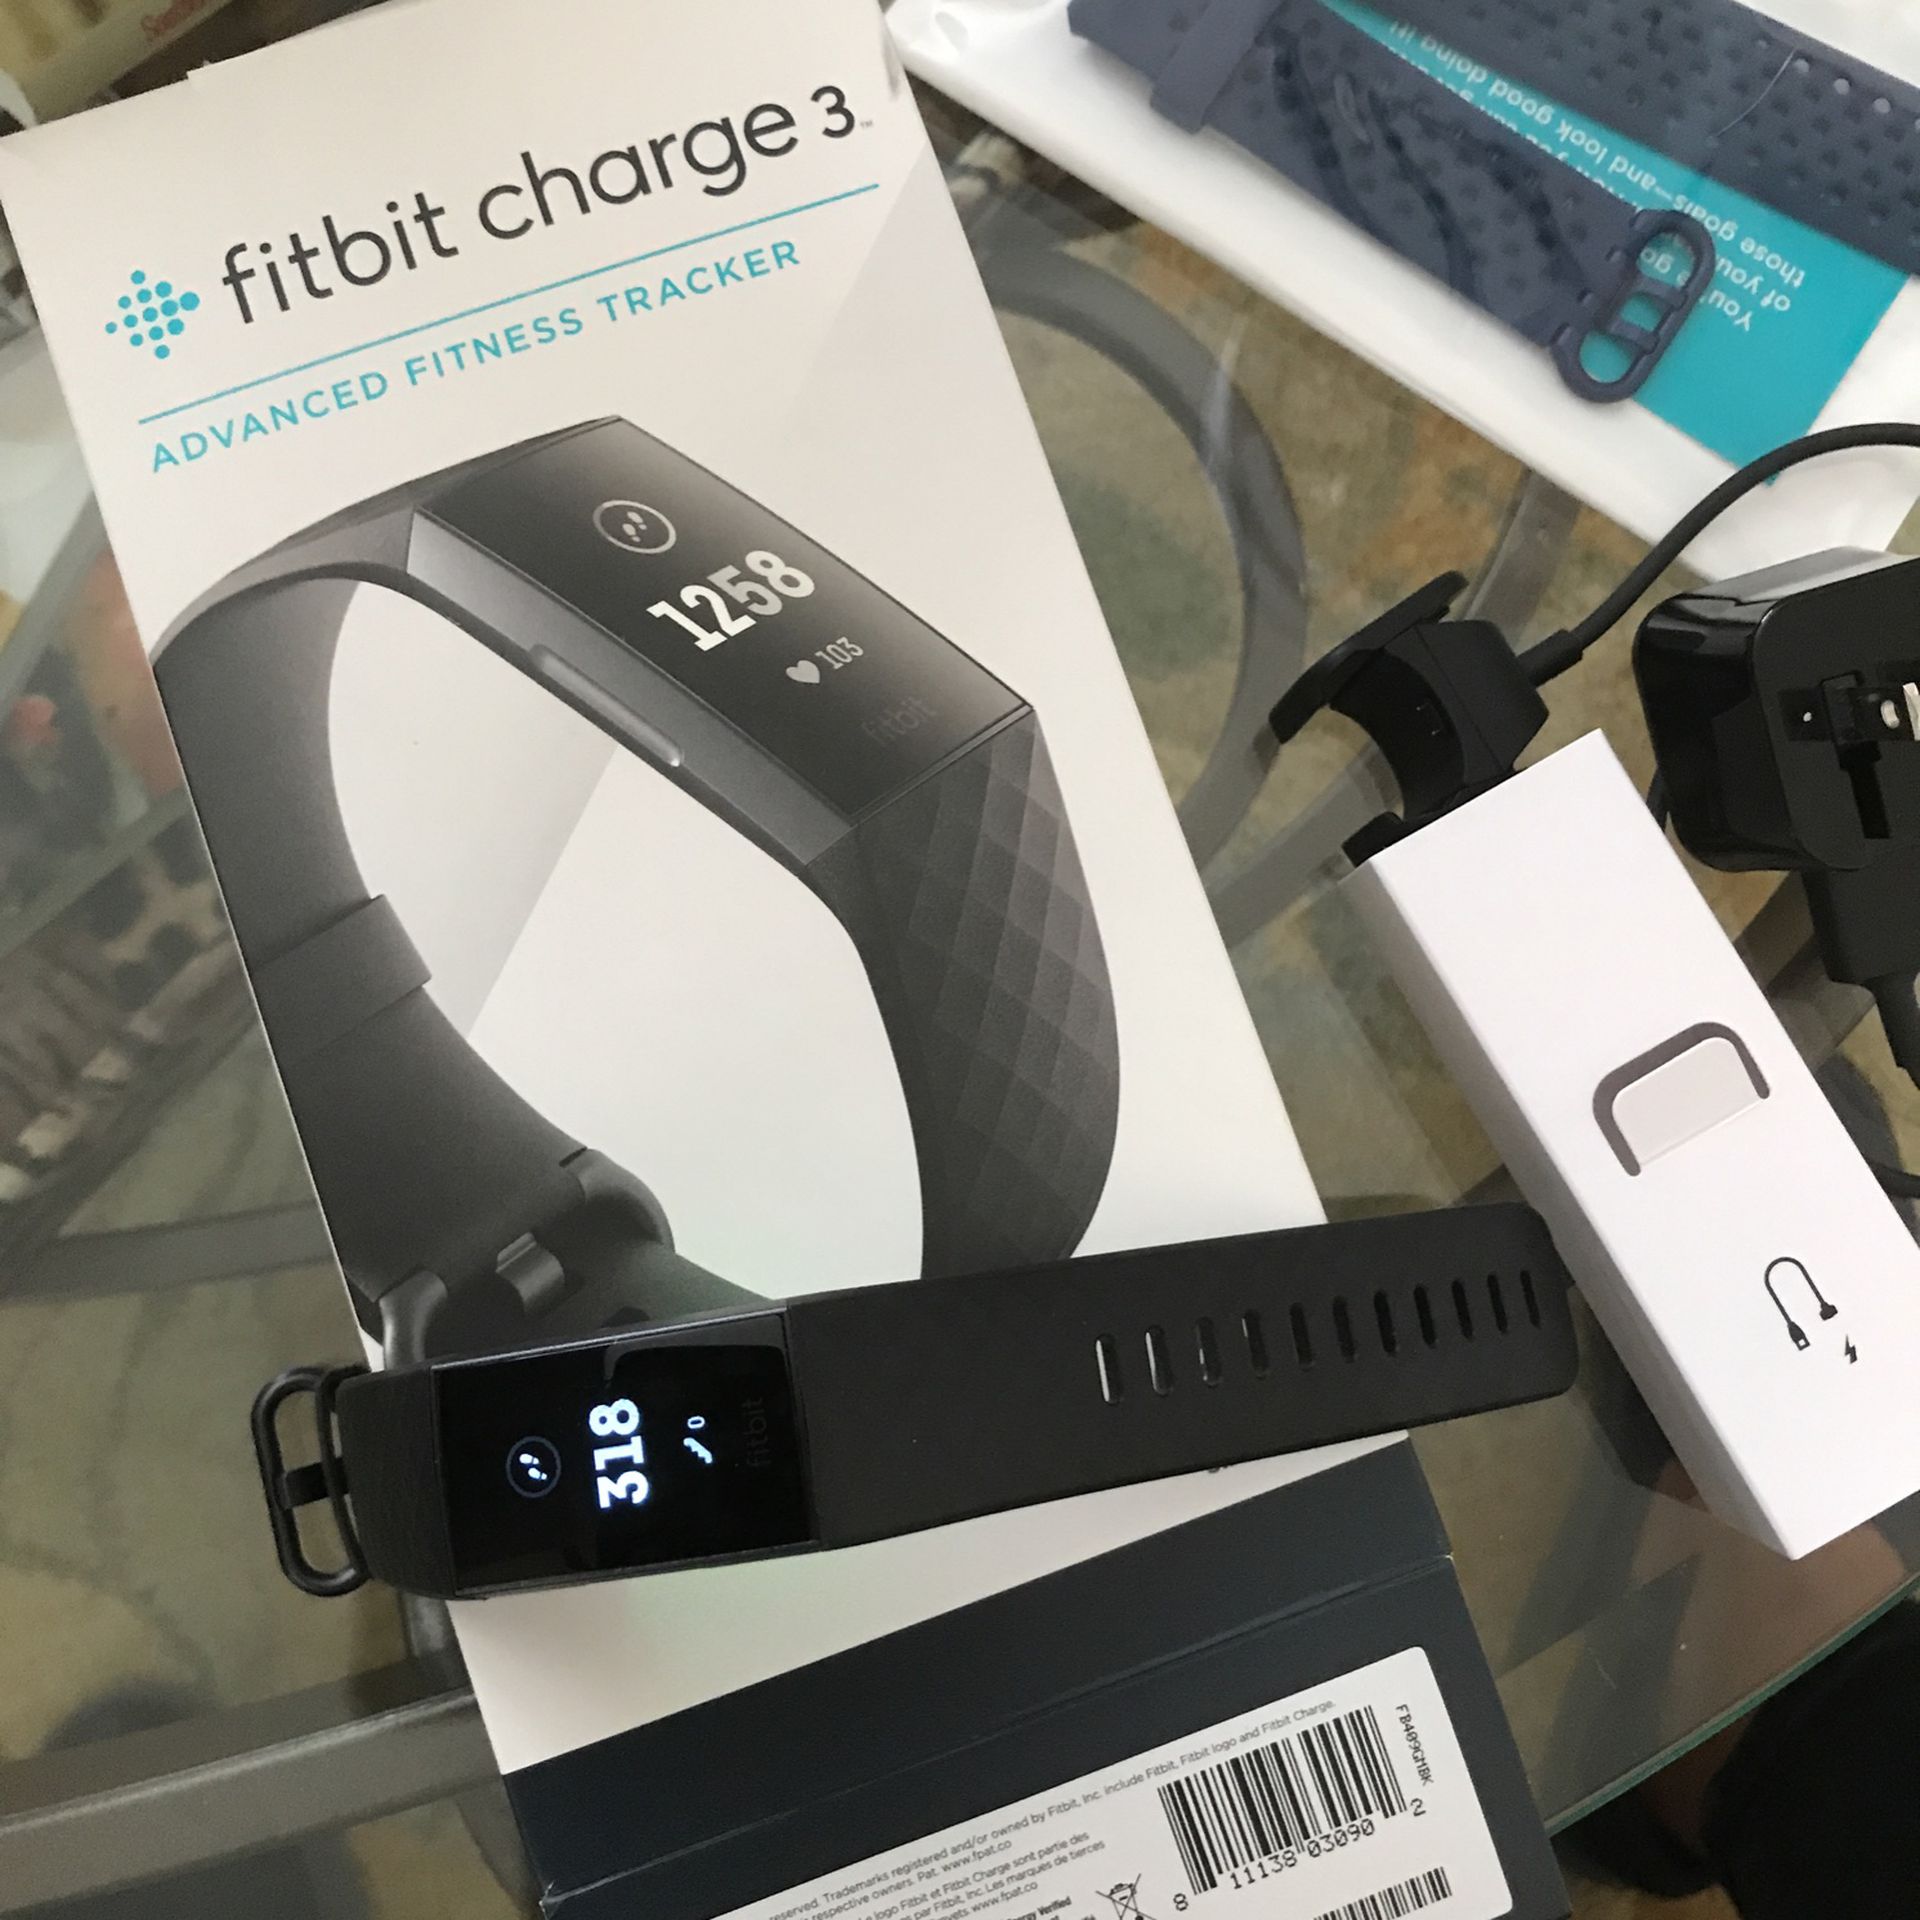 Fitbit Charger 3 Advance Fitness $new75.00 